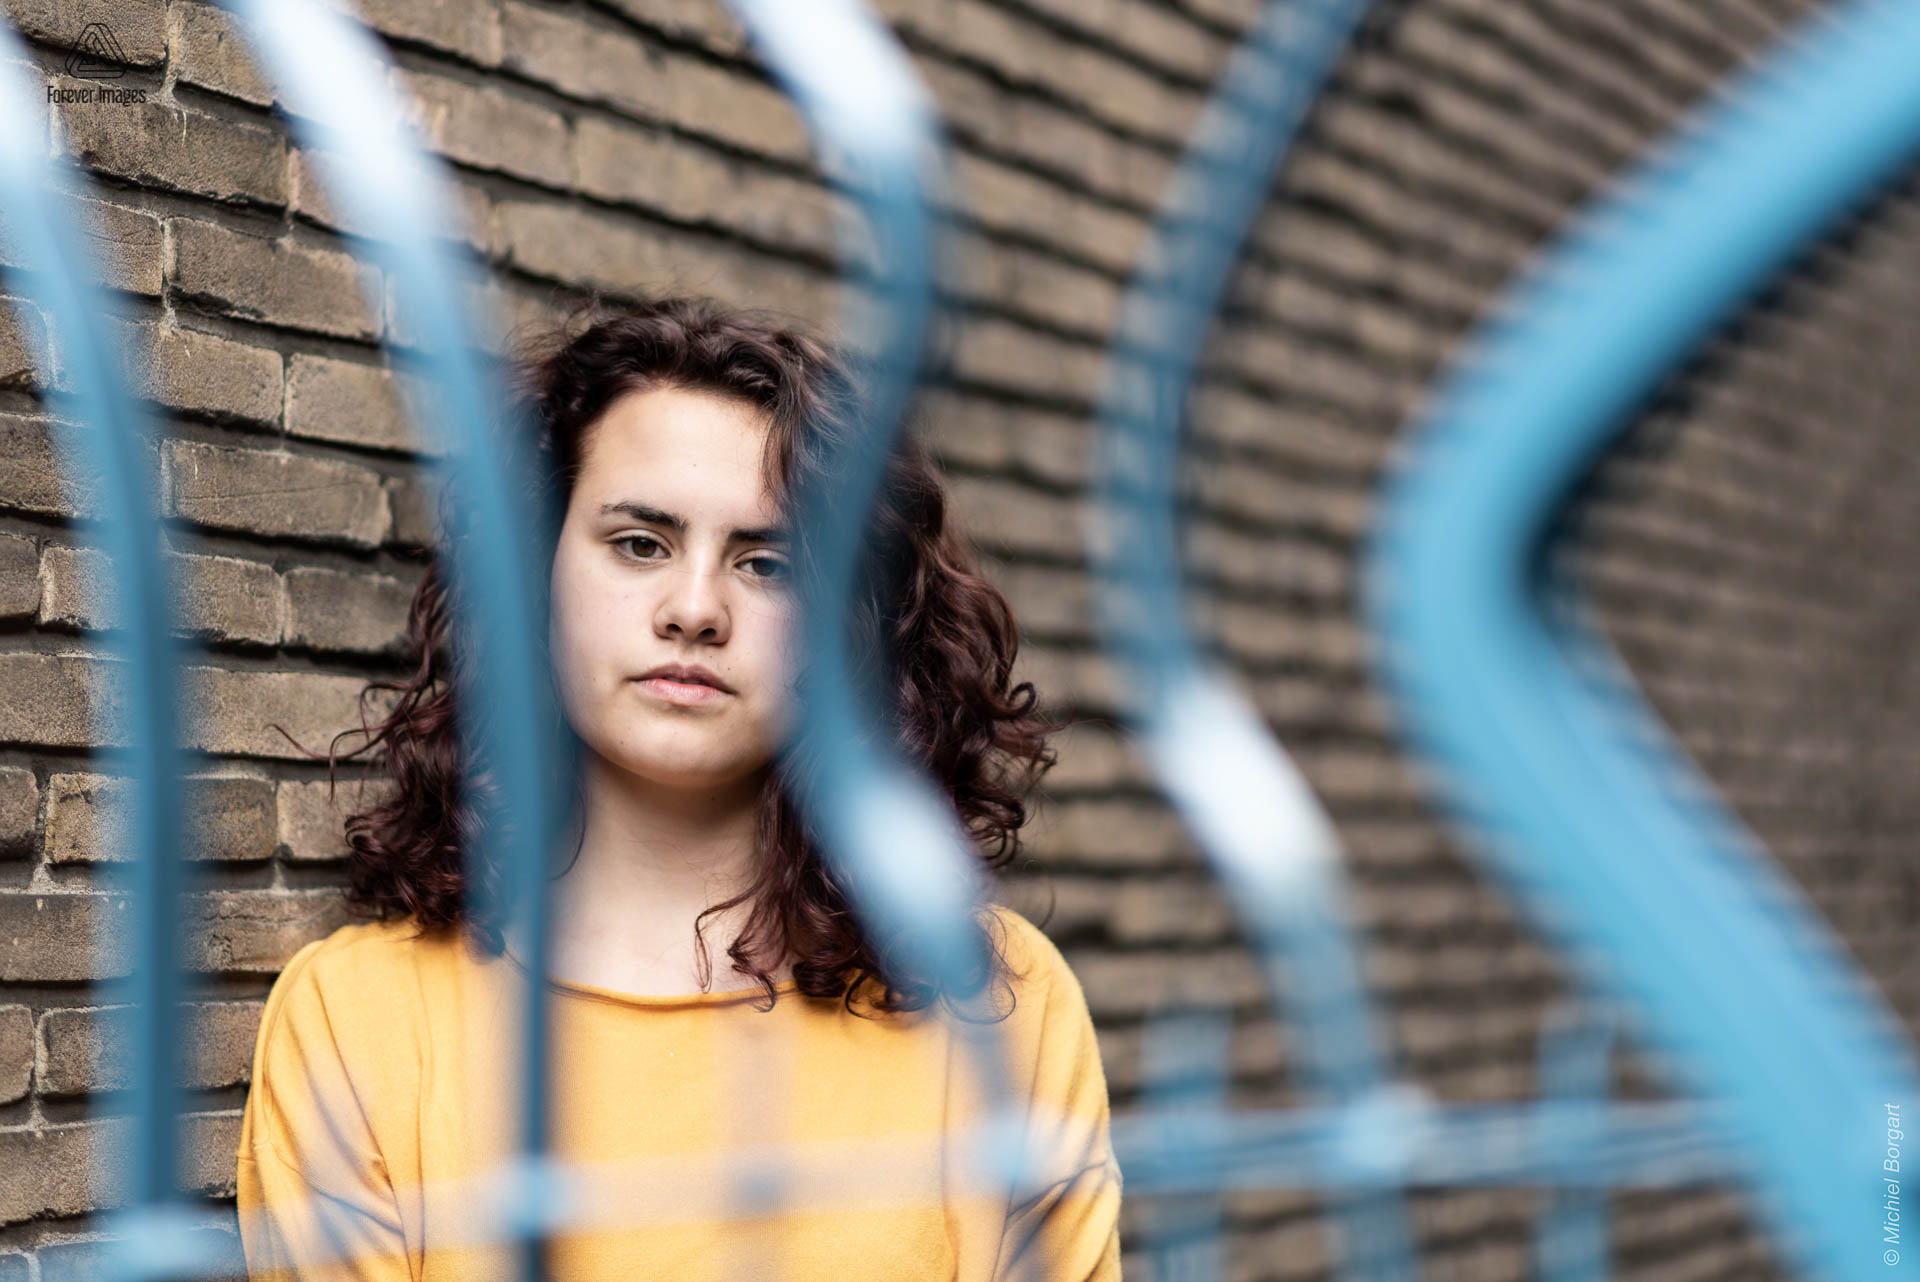 Portrait photo young lady against wall behind blue fence looking in camera | Tessa Holscher | Portrait Photographer Michiel Borgart - Forever Images.